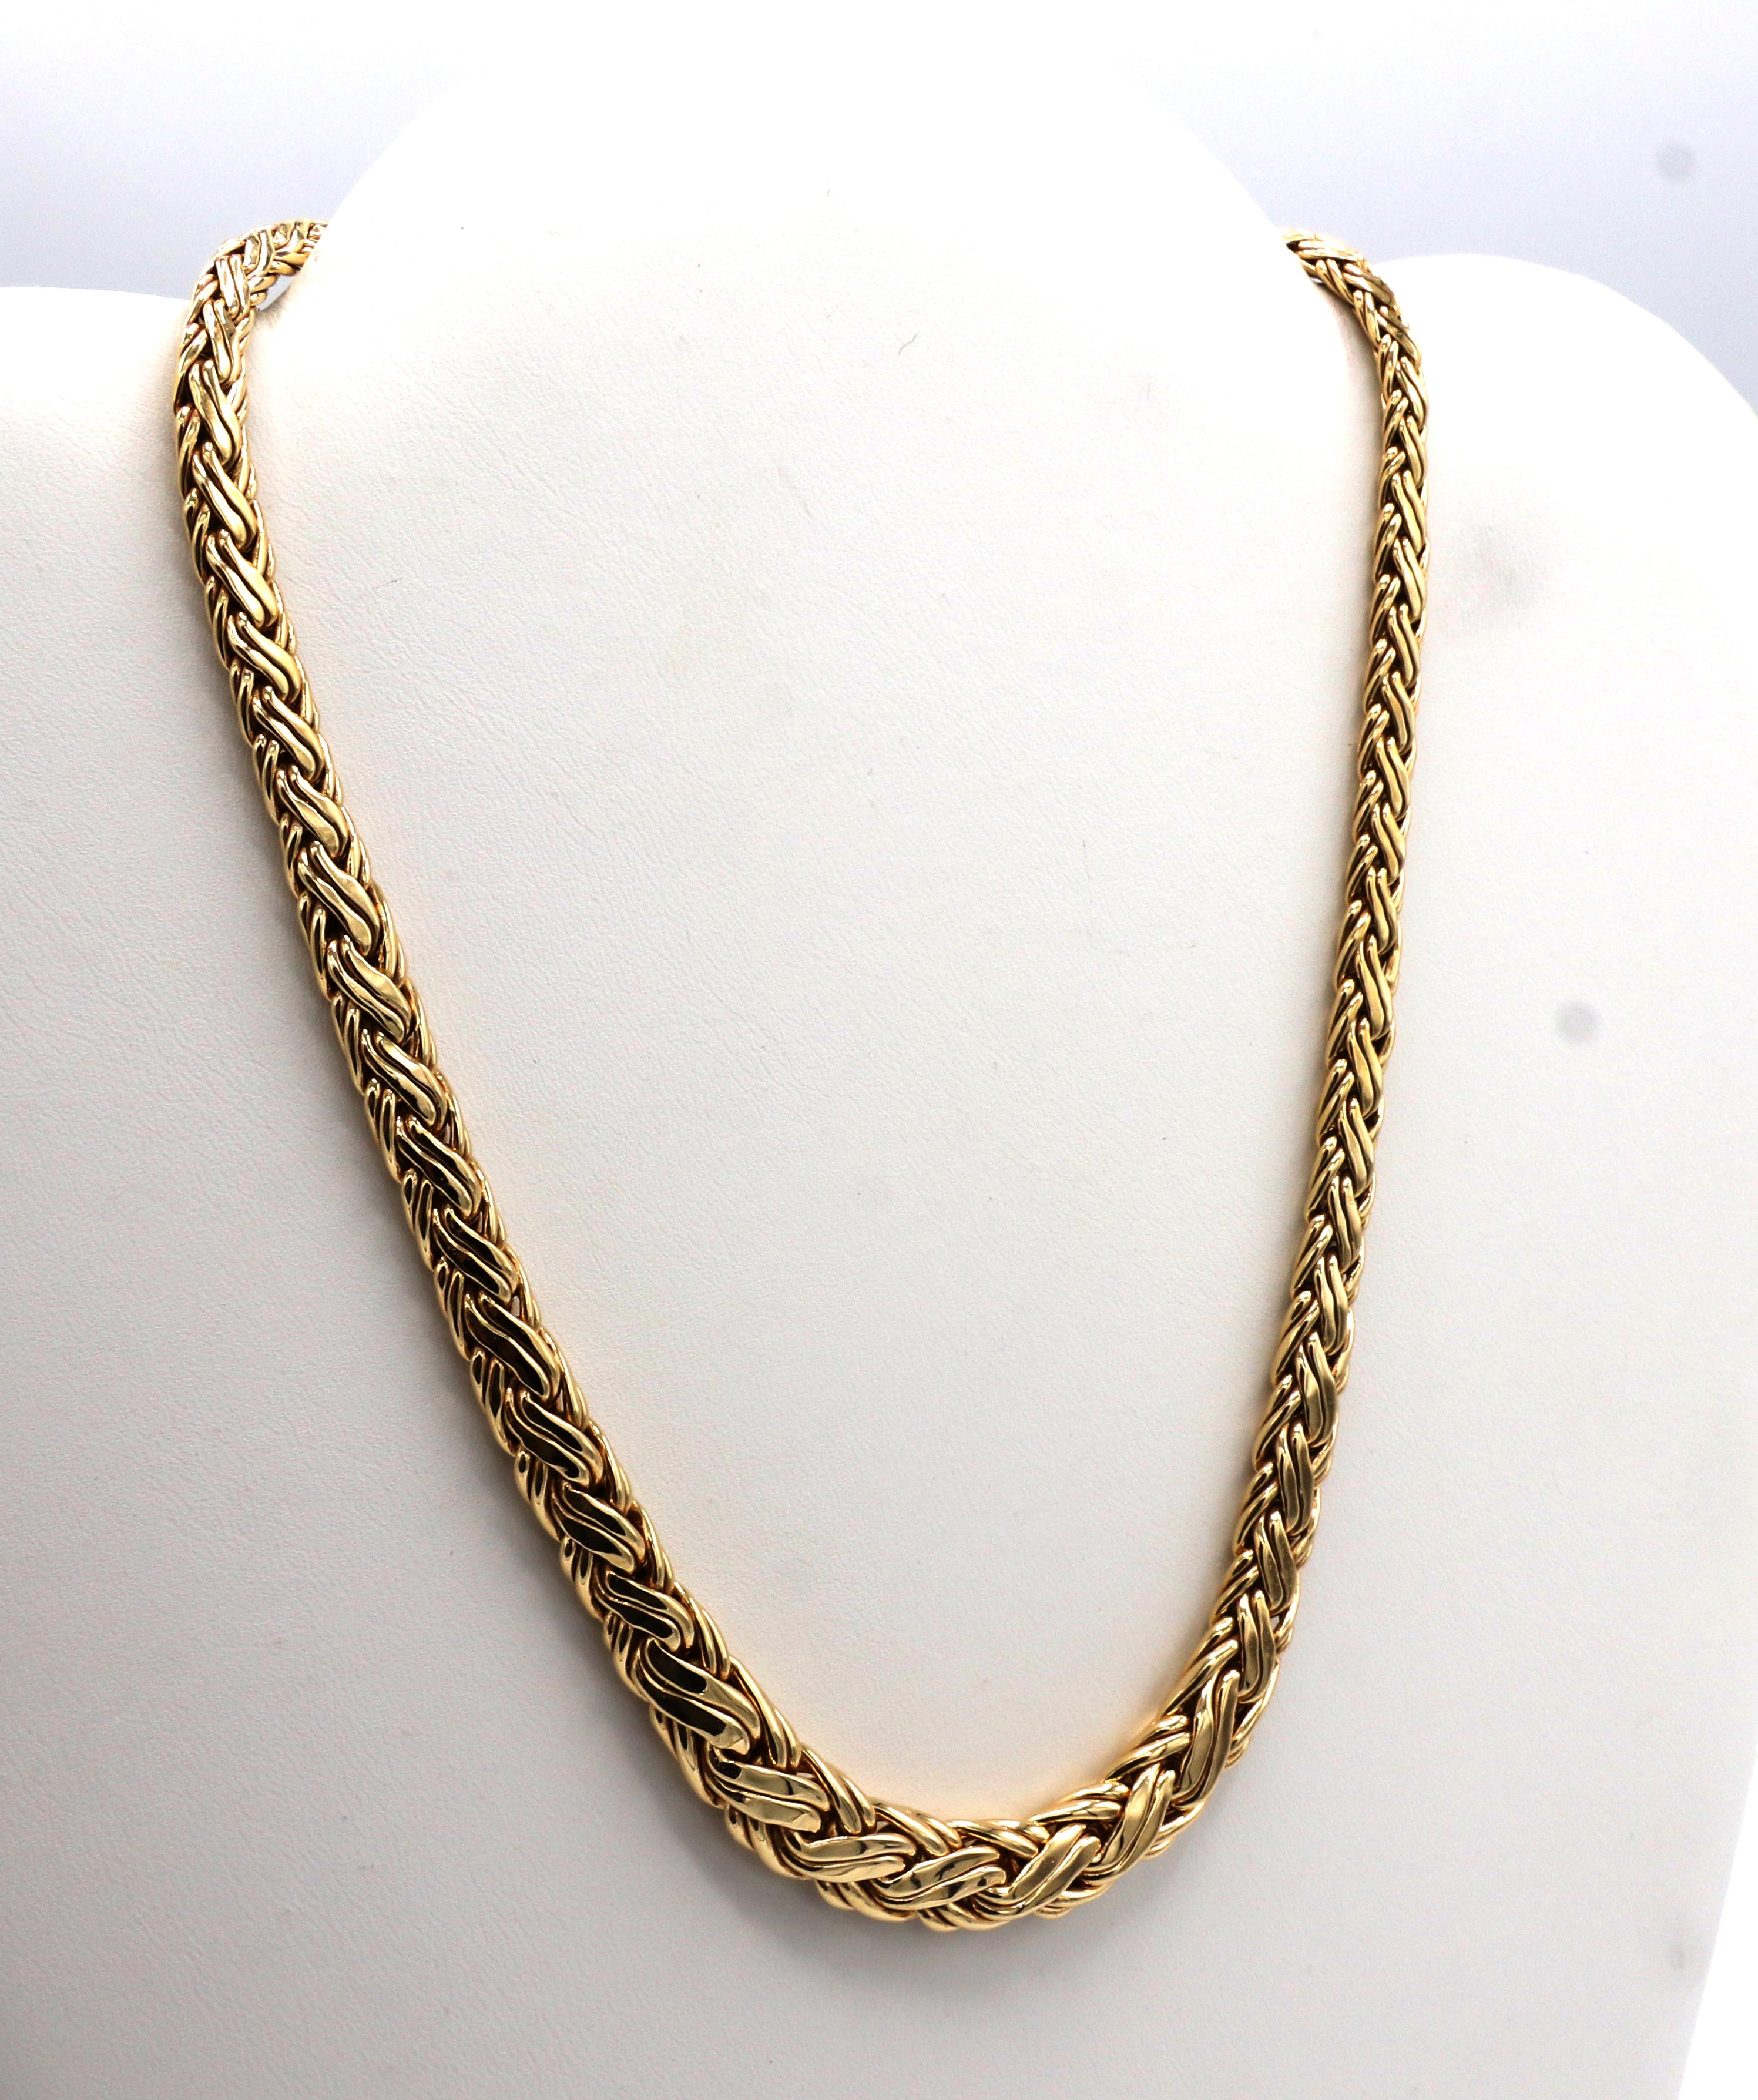 Tiffany & Co. 14 Karat Yellow Gold Graduated Woven Necklace 
Metal: 14k yellow gold
Weight: 29.9 grams
Length: 16.5 inches
Width: 4.5 - 9mm
Signed: Tiffany & Co. 585 